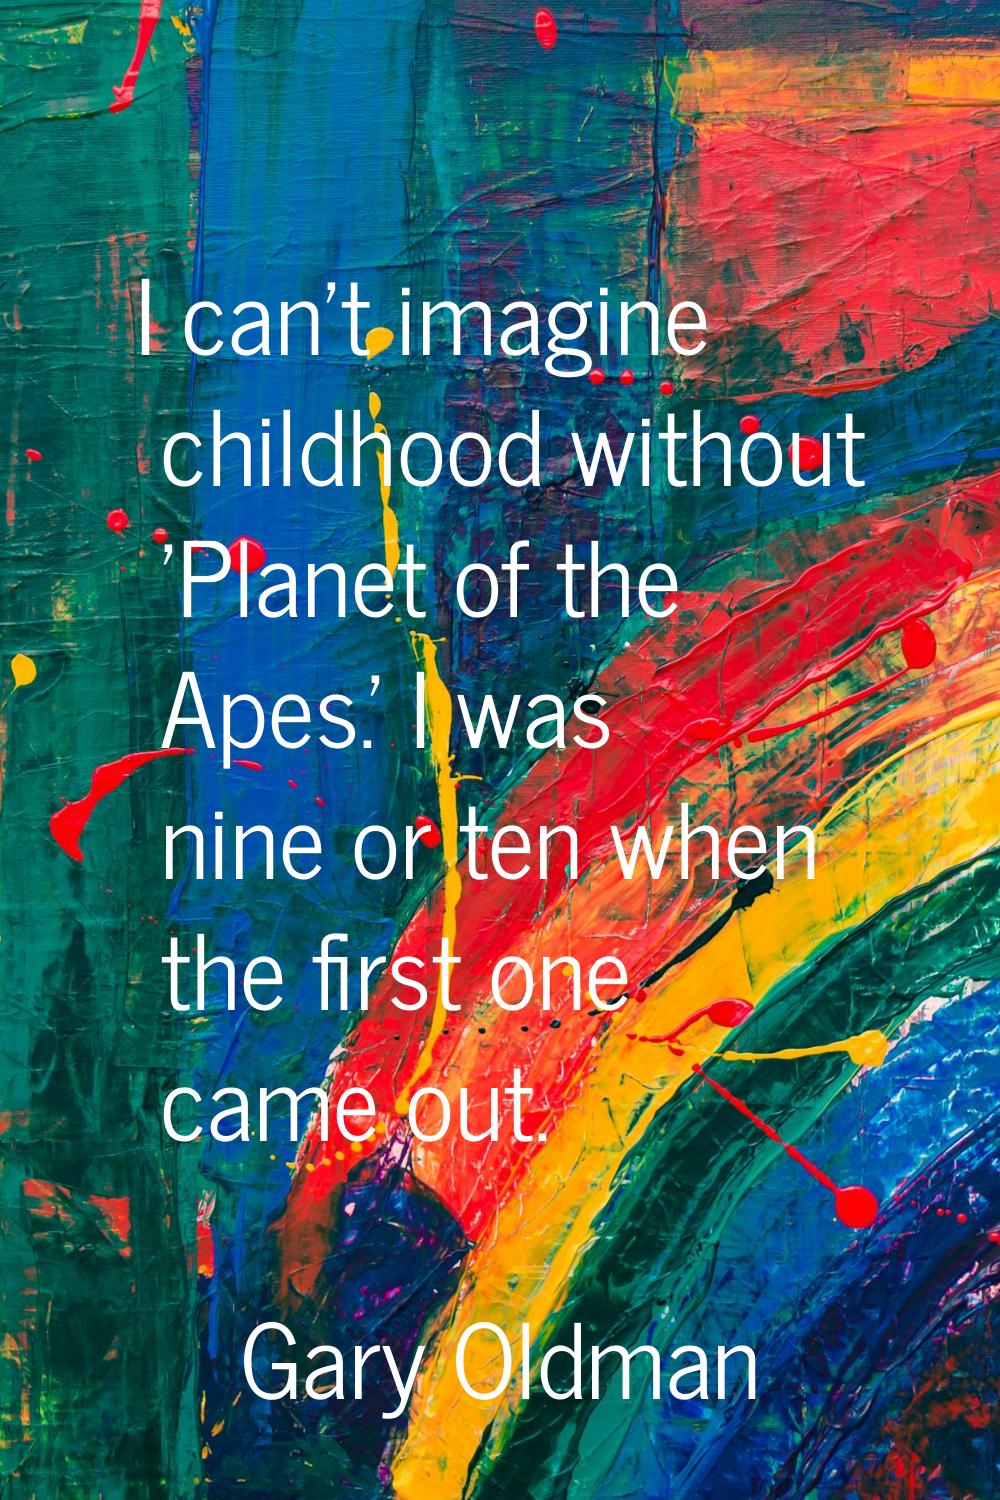 I can't imagine childhood without 'Planet of the Apes.' I was nine or ten when the first one came o